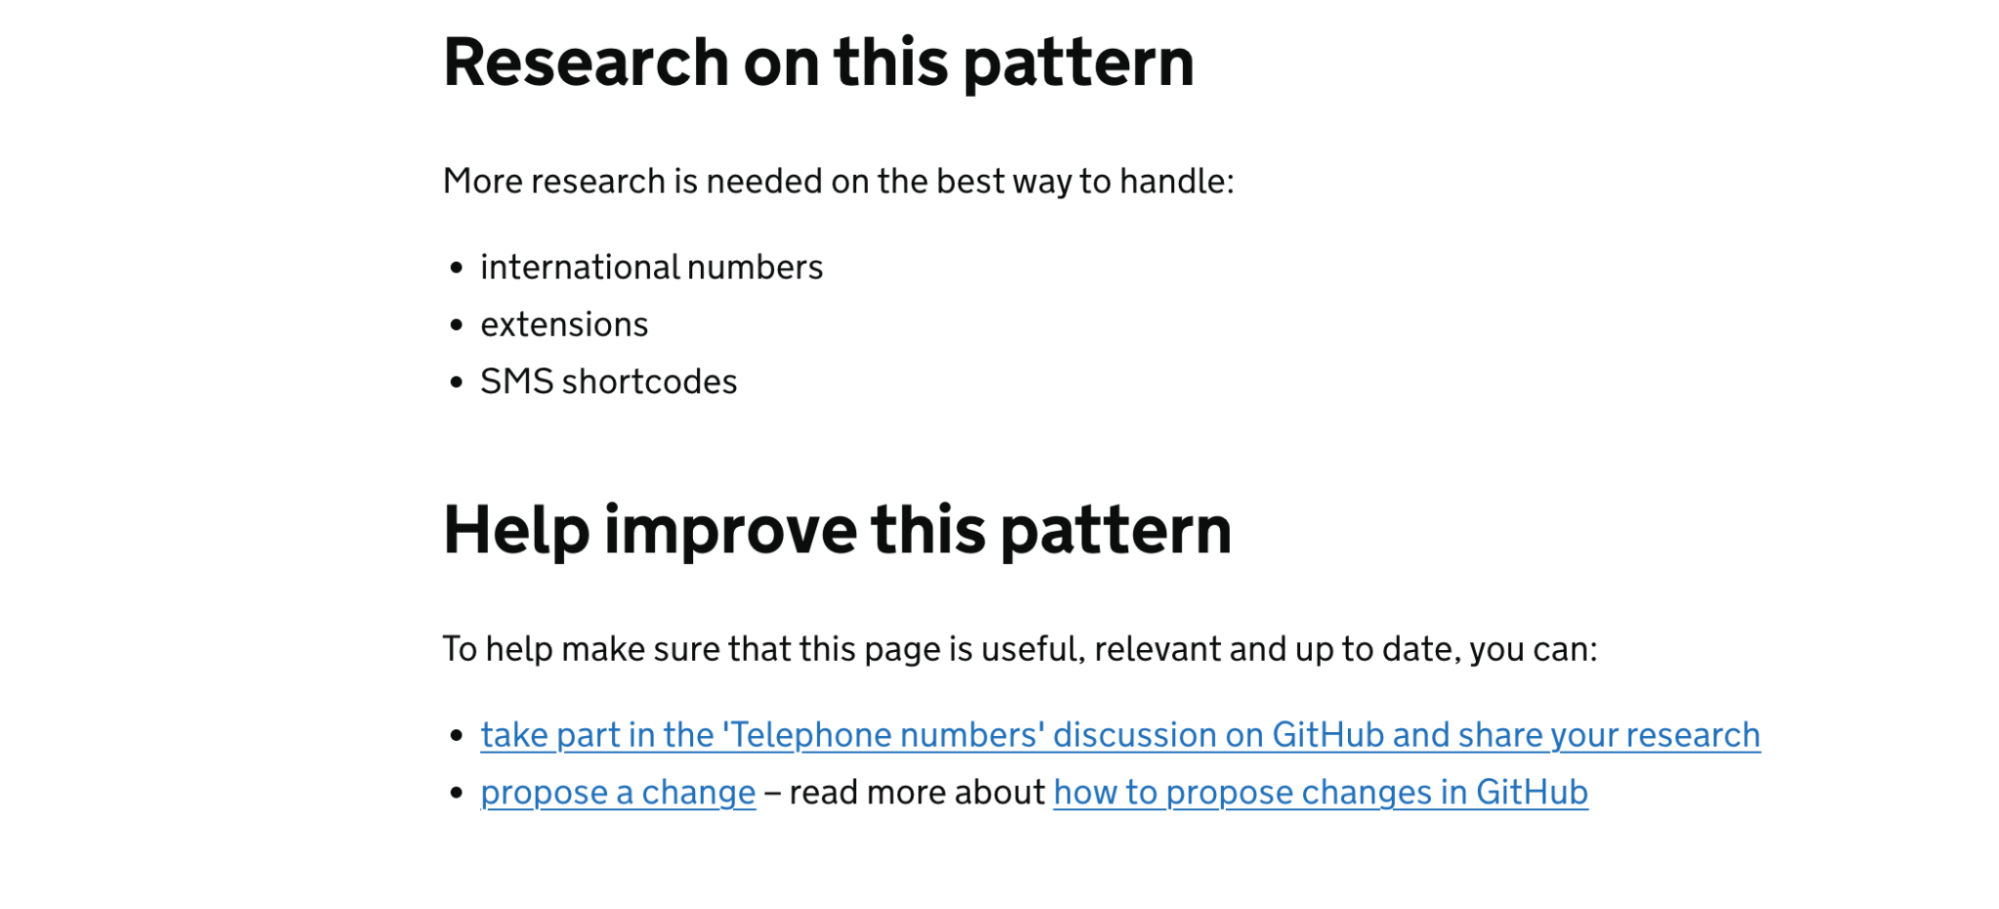 Screenshot of the research section of the "Ask users for Telephone number" design pattern on the GOV.UK Design System. It reads: Research on this pattern. More research is needed on the best way to handle: - international numbers - extensions - SMS shortcodes Help improve this pattern. To help make sure that this page is useful, relevant and up to date, you can: - take part in the 'Telephone numbers' discussion on GitHub and share your research - propose a change – read more about how to propose changes in GitHub